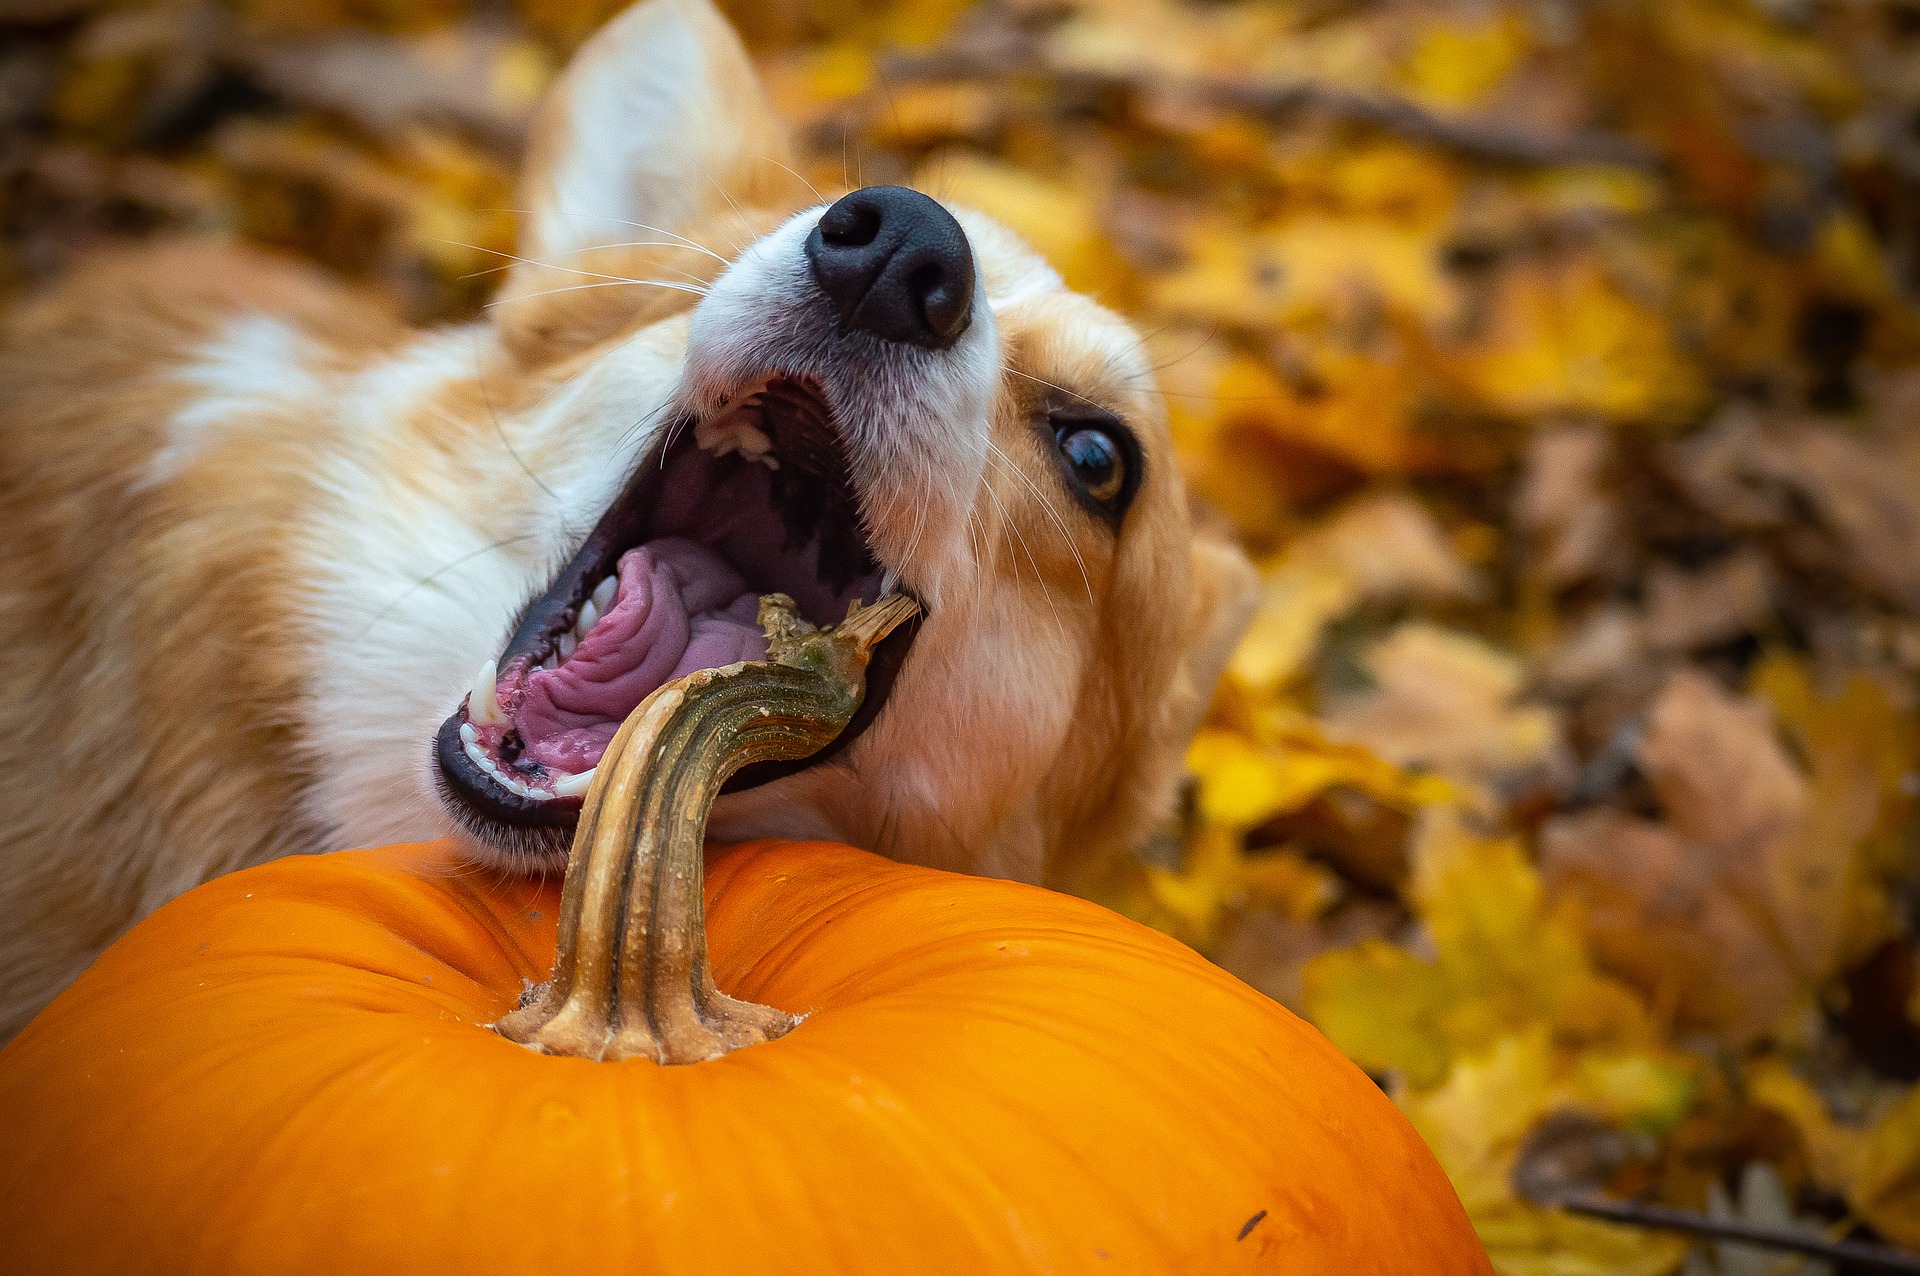 Pumpkin for Dogs: Why Feed it Year-Round?